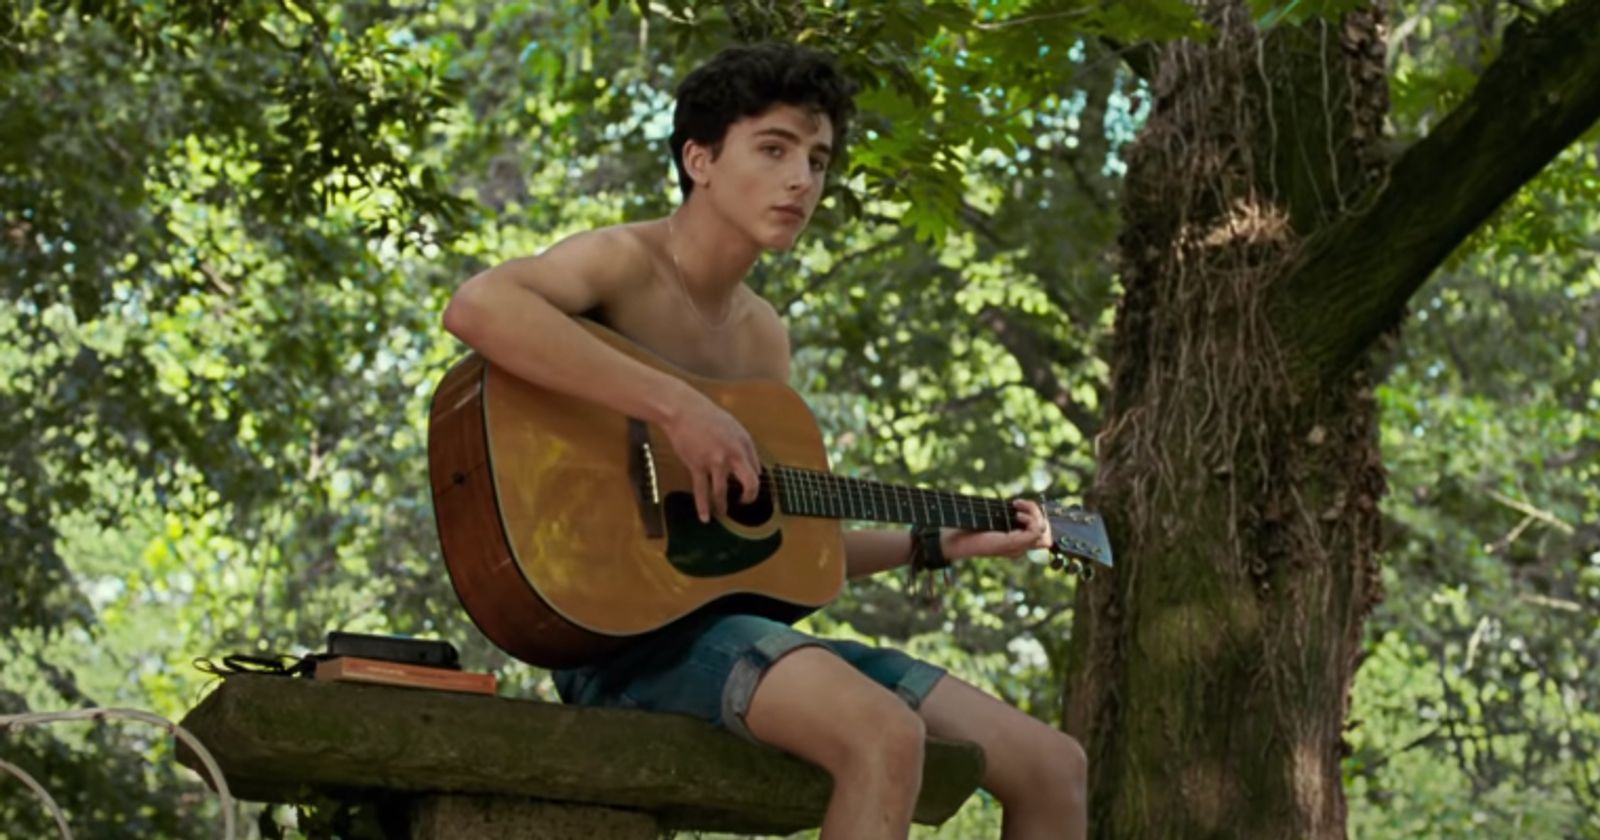 Call Me by Your Name streaming: where to watch online?